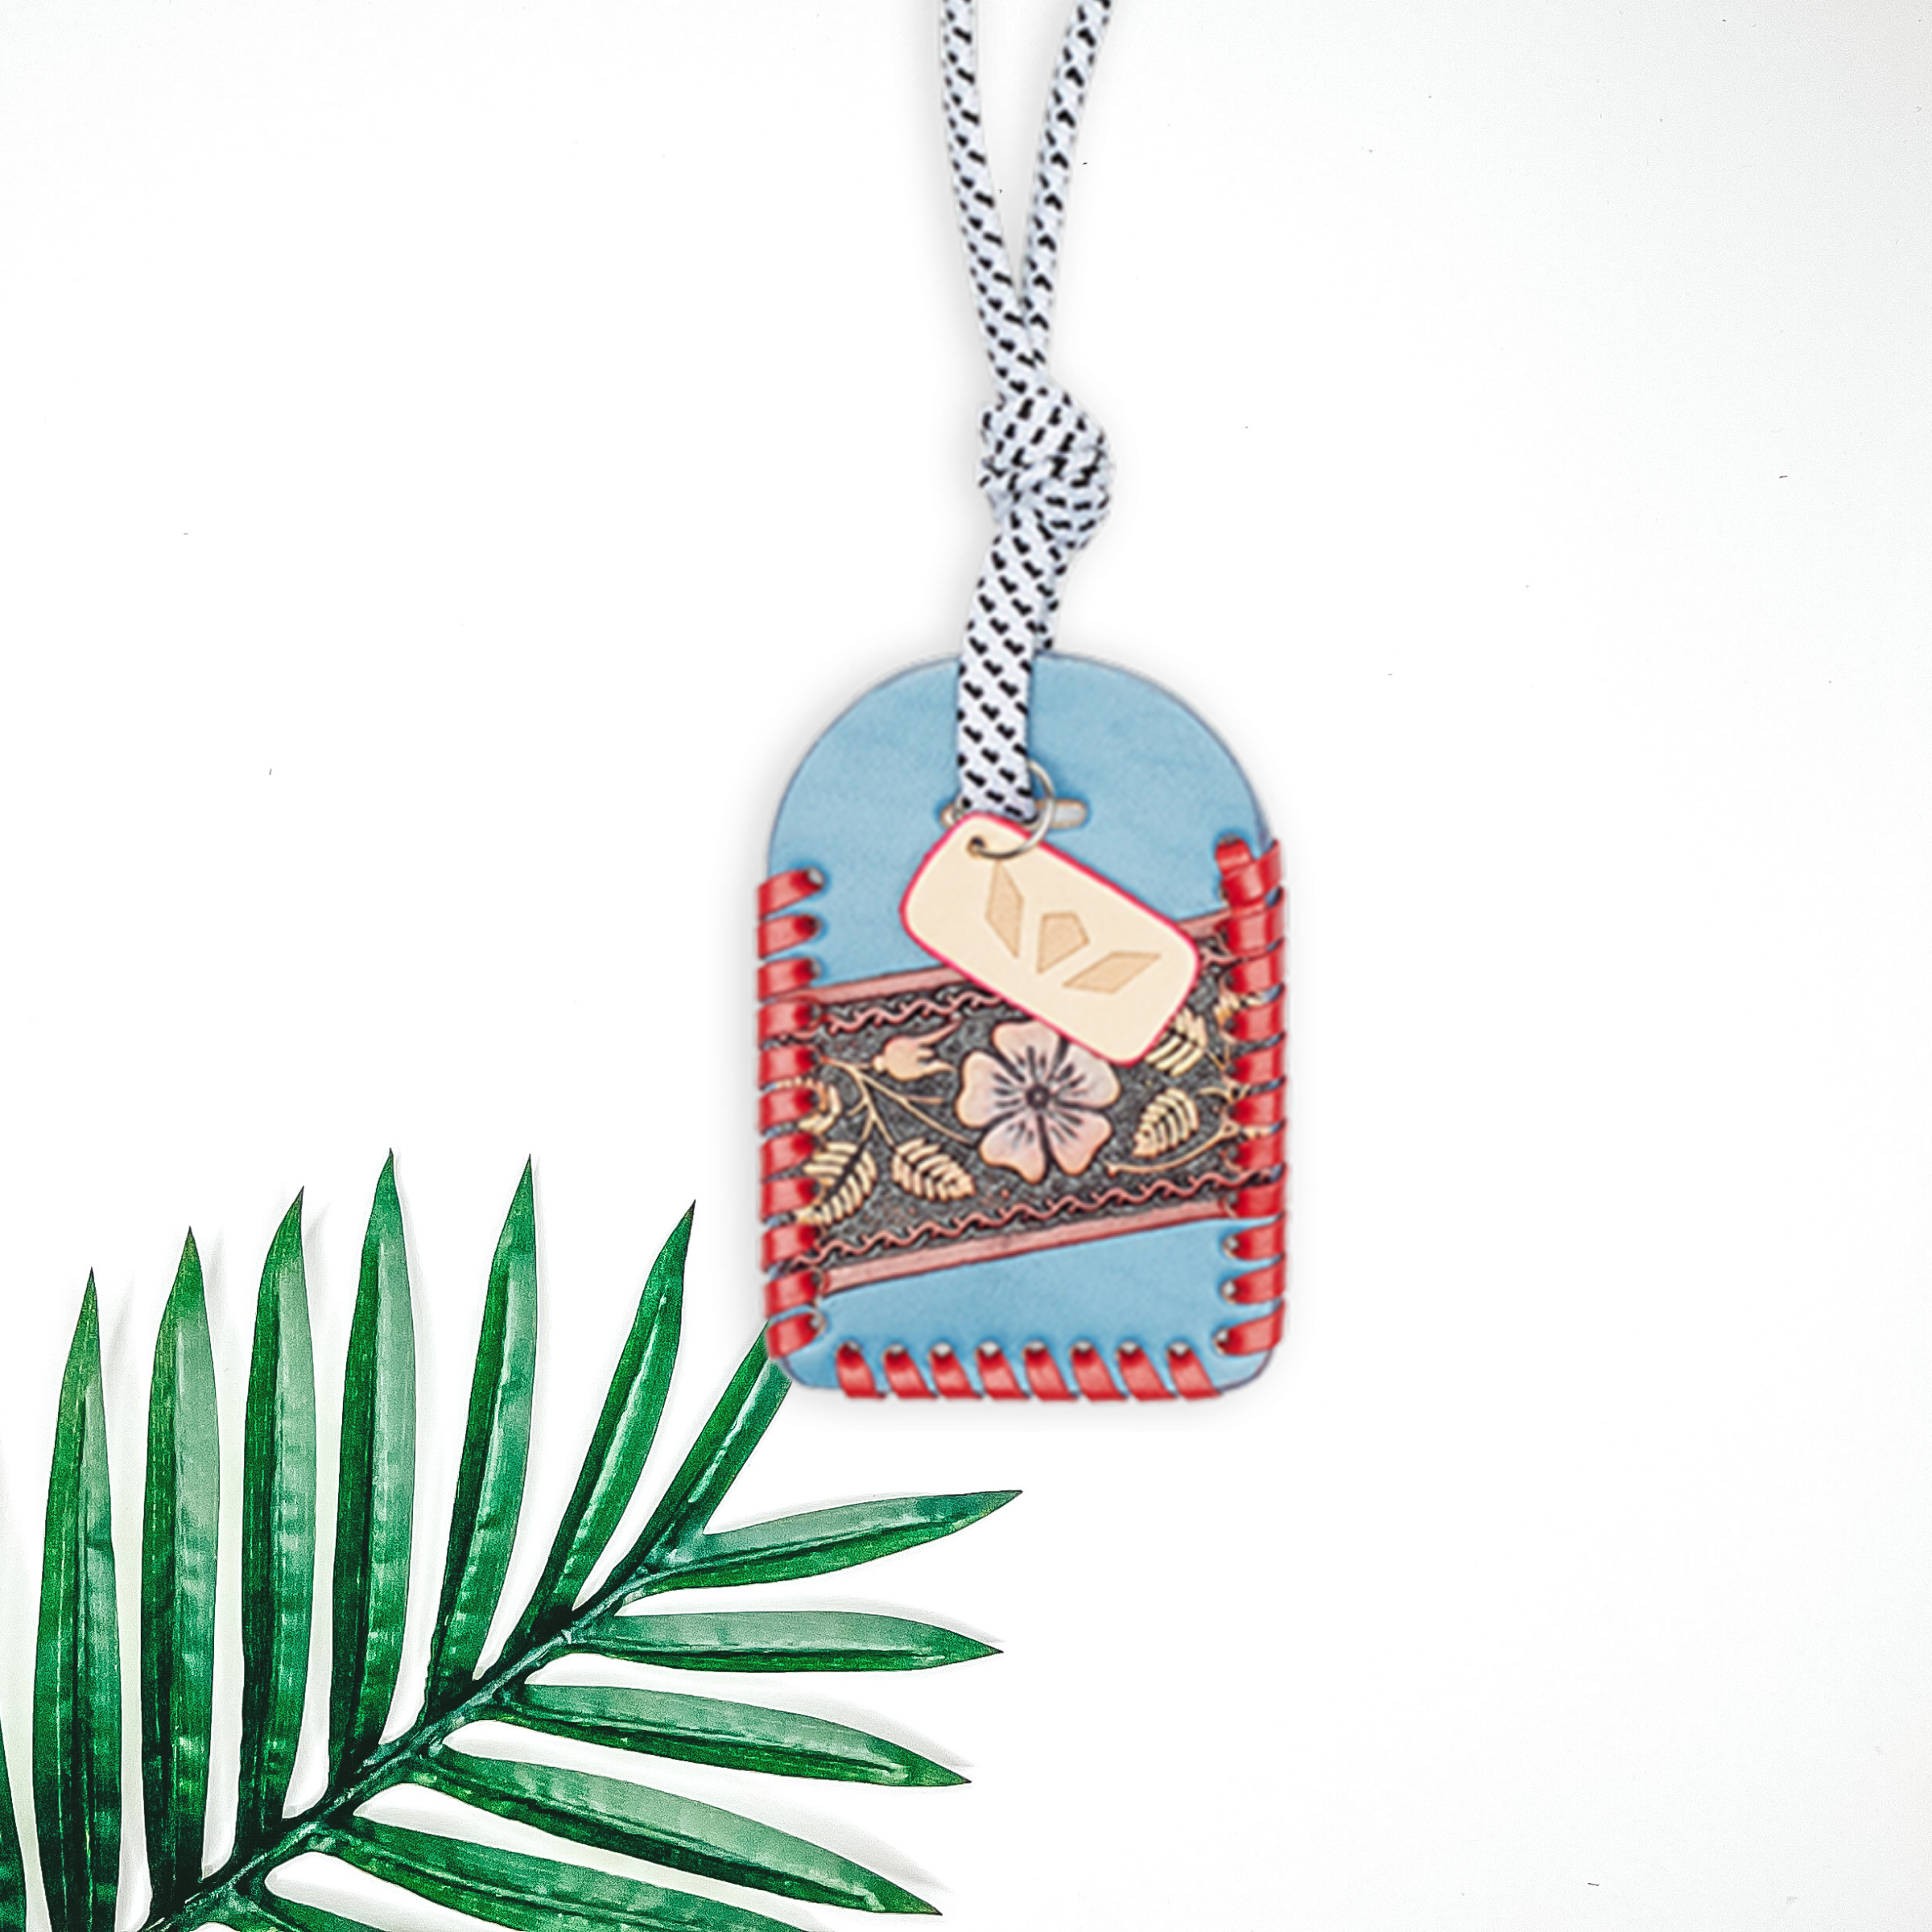 Pictured is a luggage tag in blue and red. to the leeft of the tag is a palm leaf on a white background. 